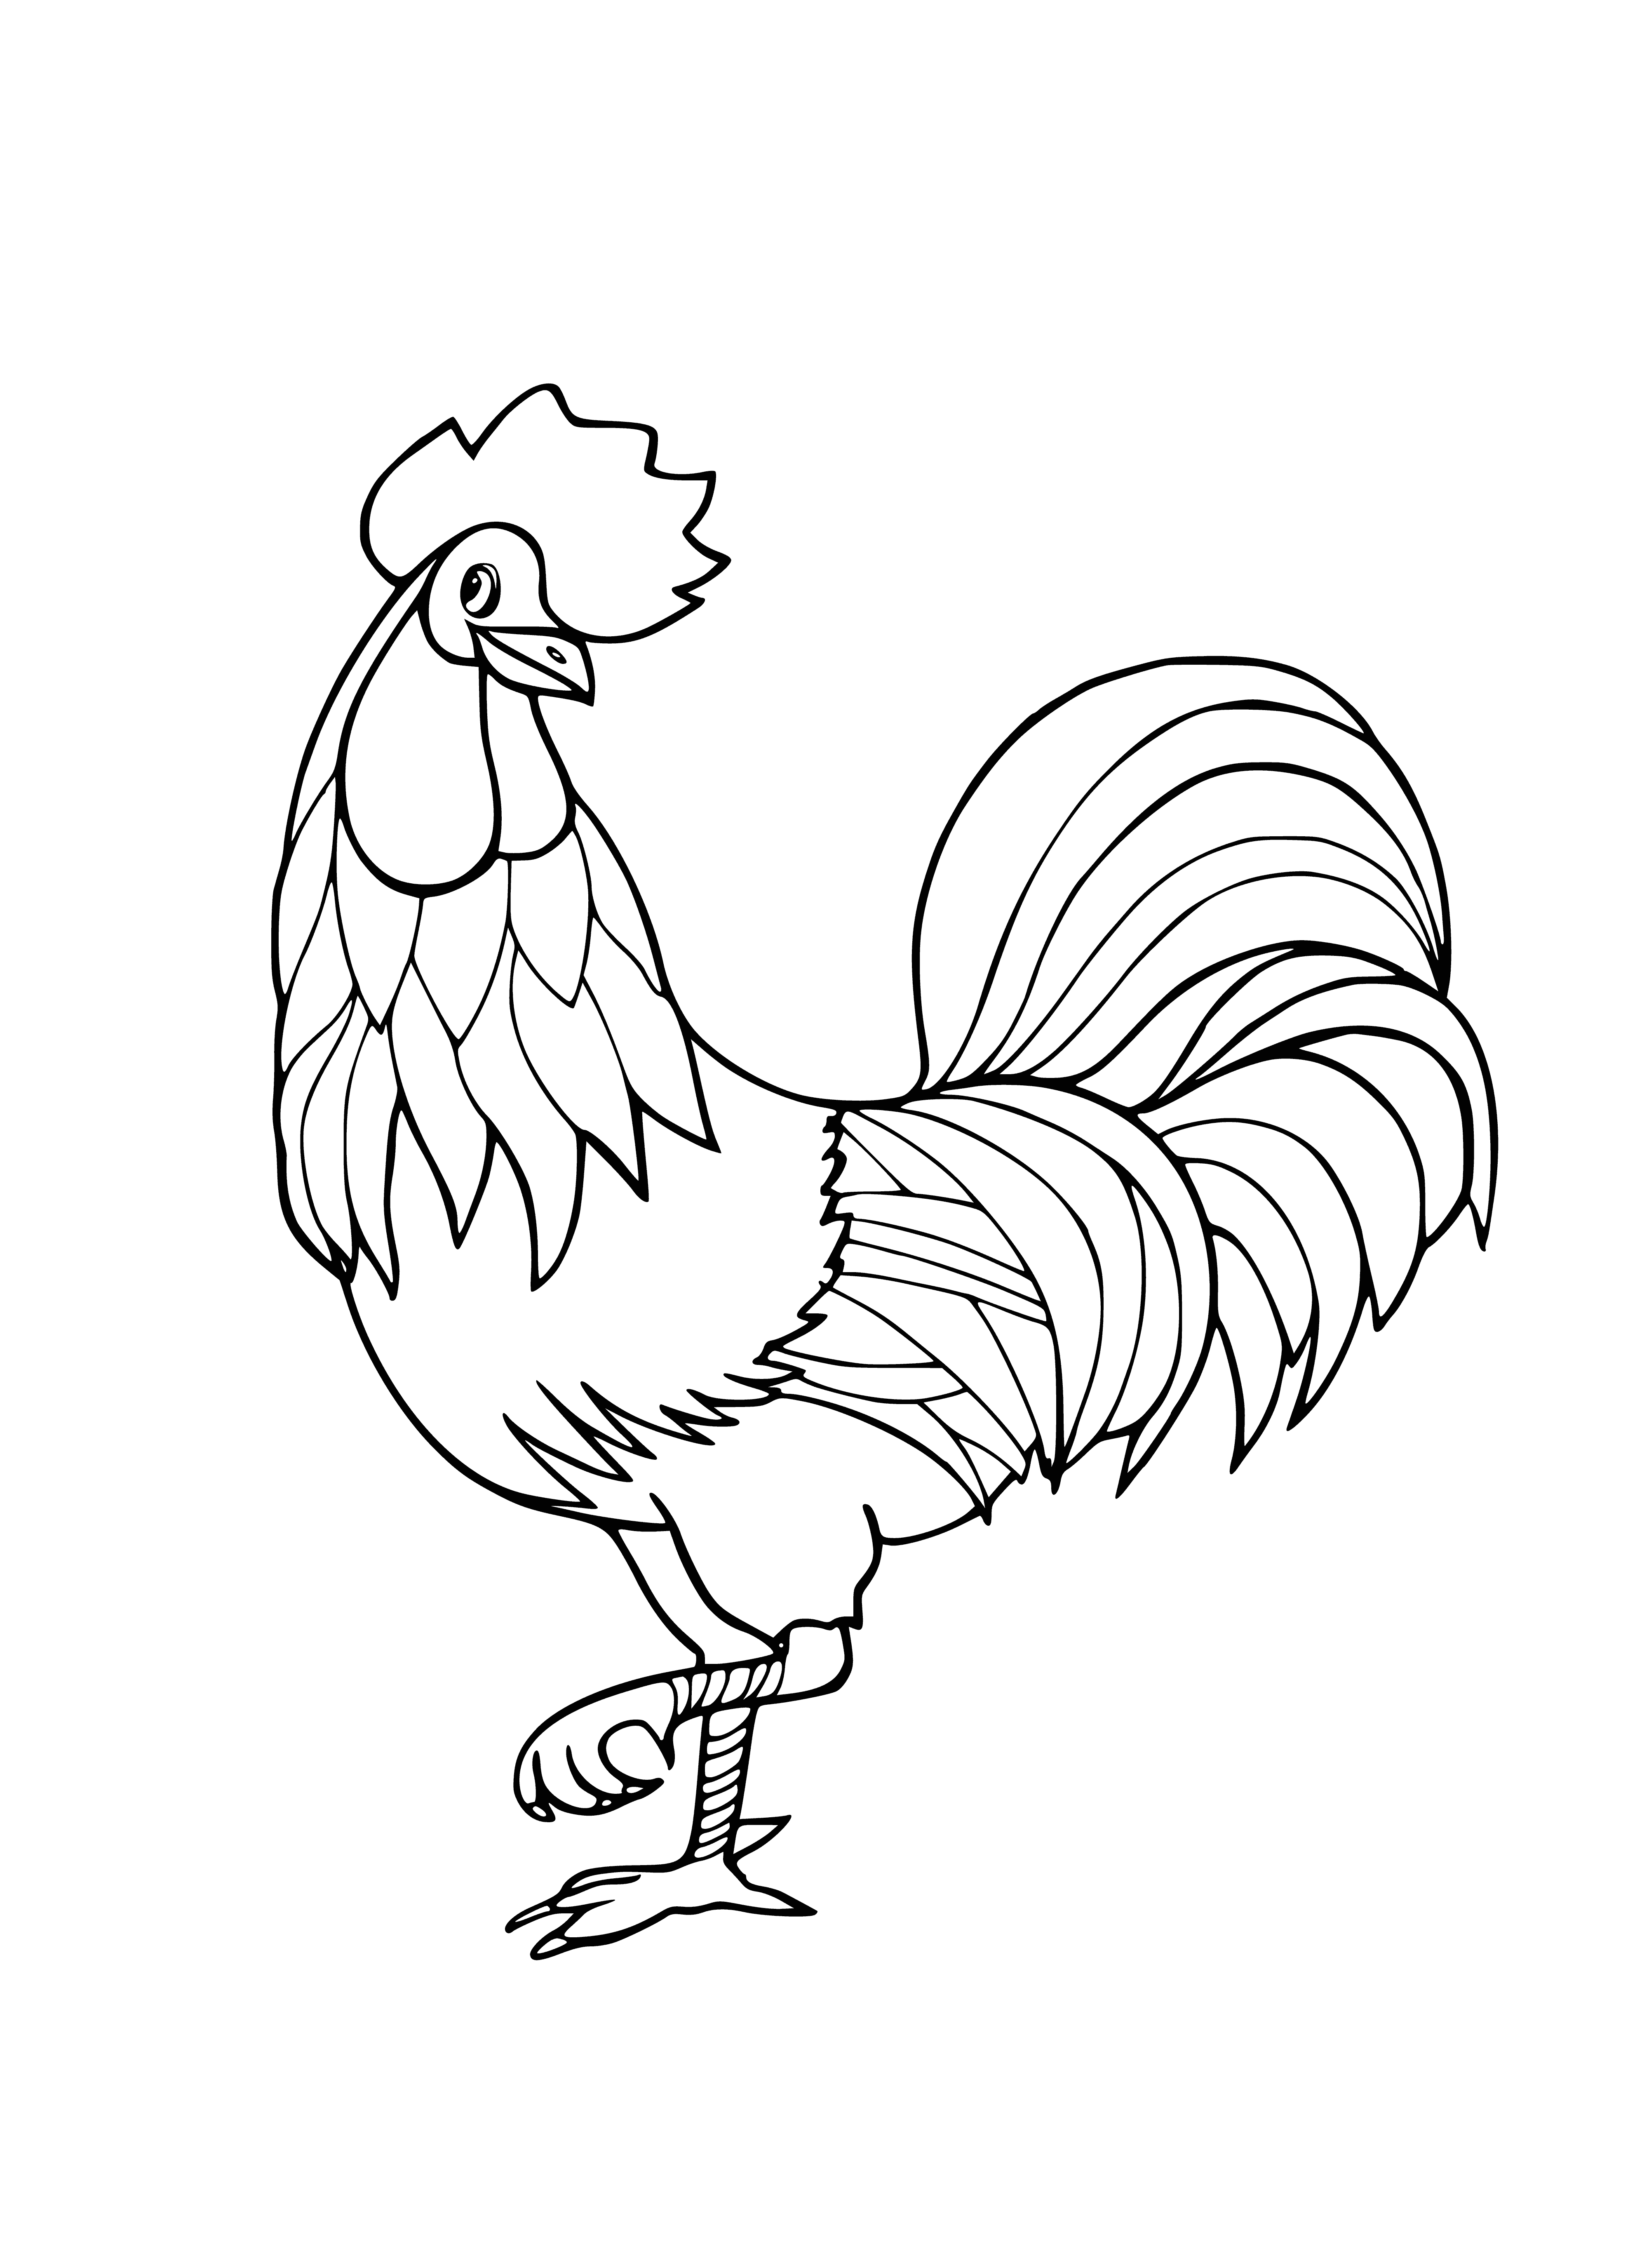 coloring page: Rooster standing on a fence, brown & white, known for crowing; head turned to side, long tail curls up at end.